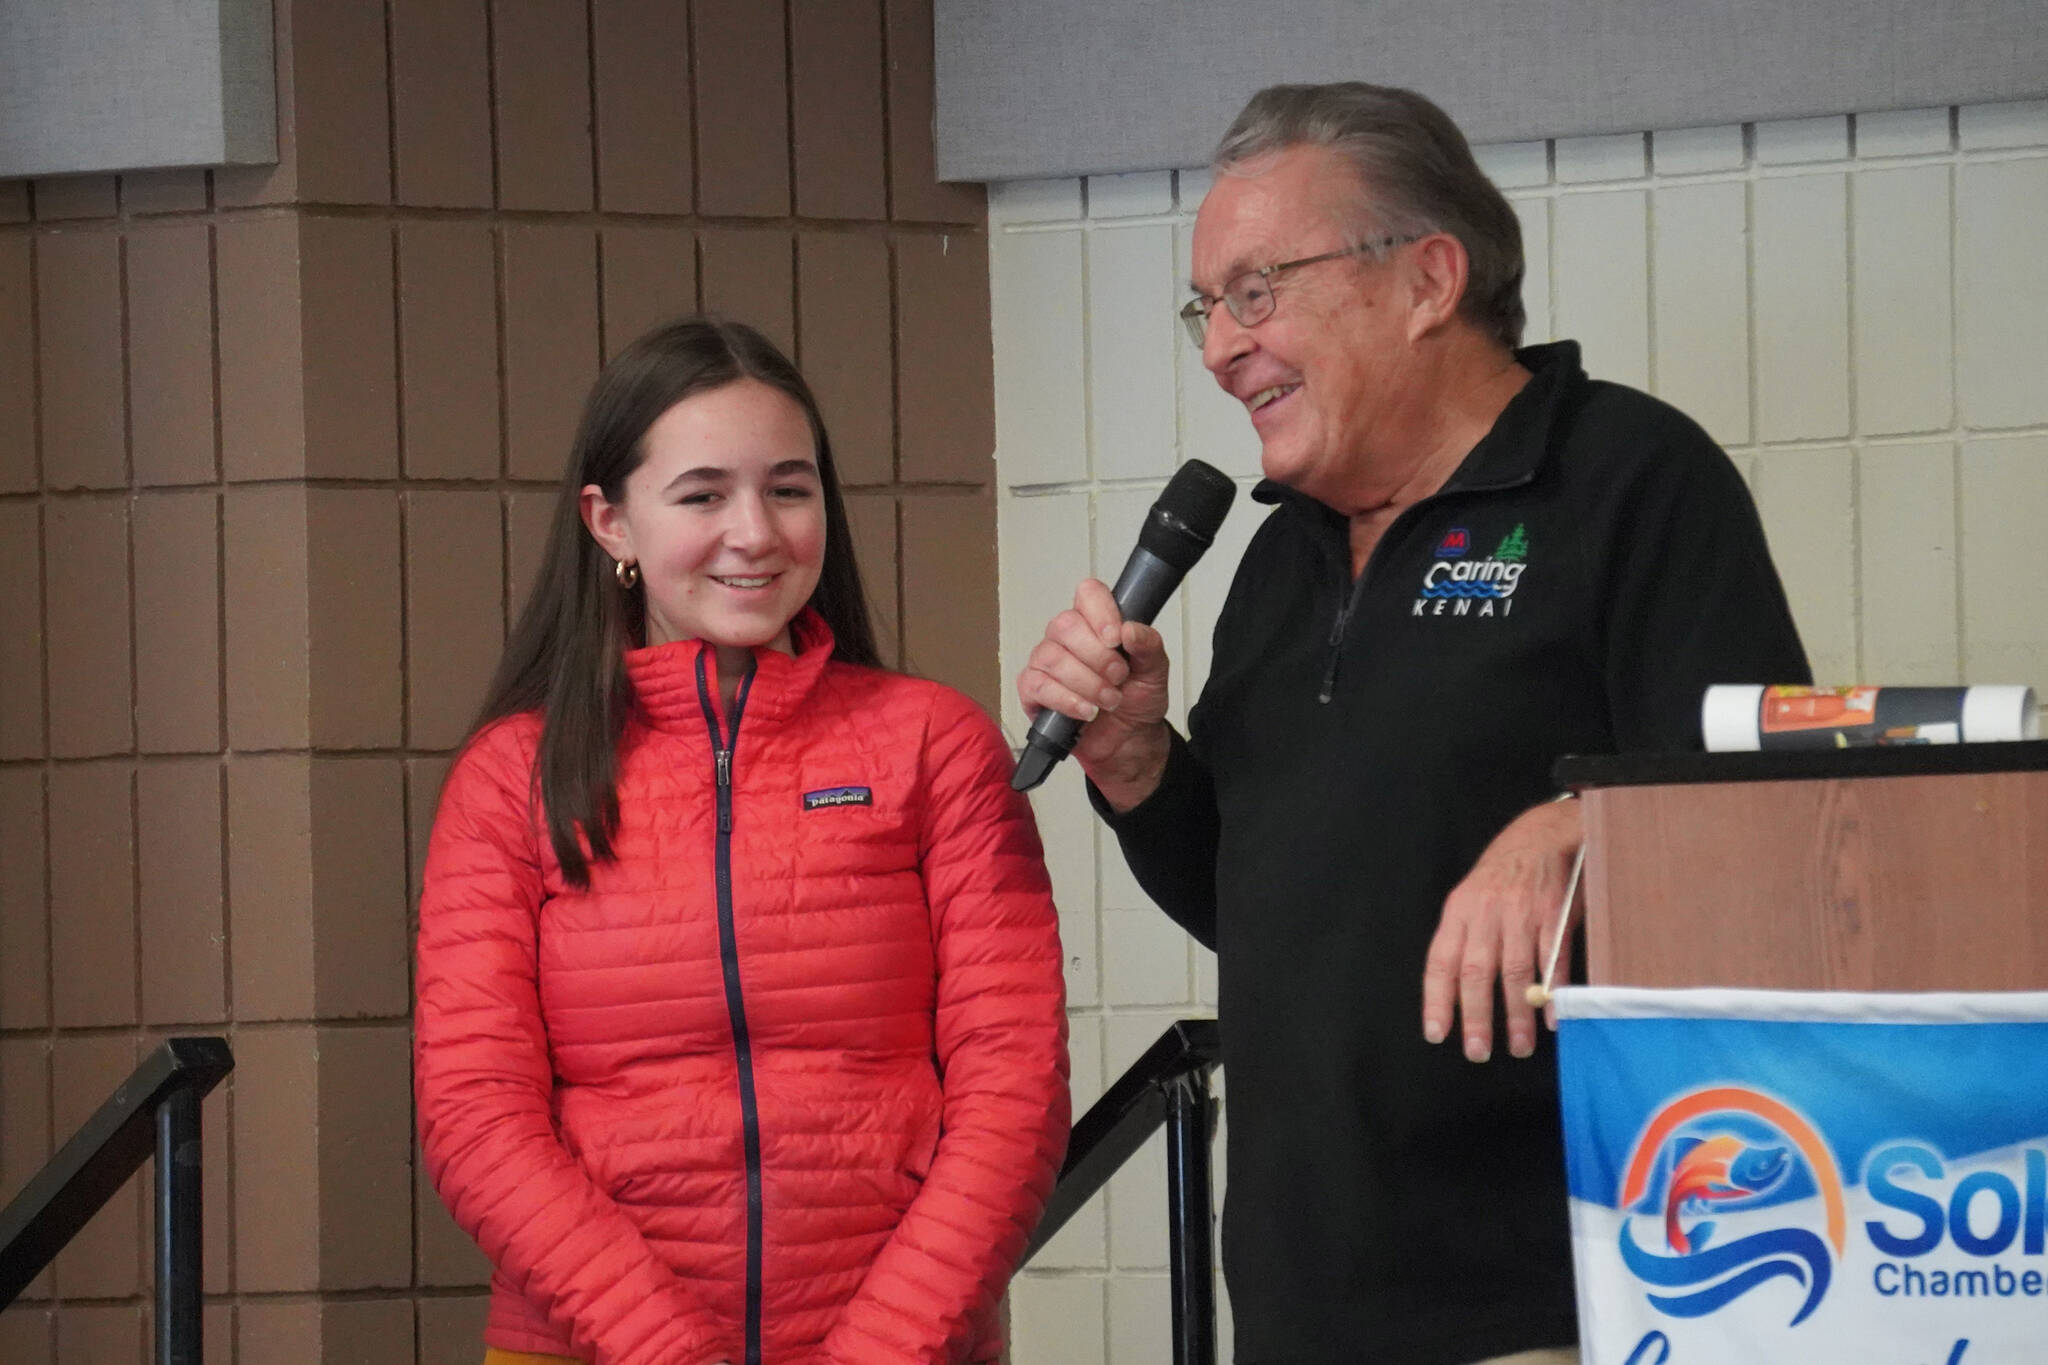 McKenna Black, of Homer High School, is introduced by Merrill Sikorski at the Caring for the Kenai Awards Celebration held during a Joint Chamber Luncheon on Wednesday, May 3, 2023, at the Soldotna Regional Sports Complex in Soldotna, Alaska. (Jake Dye/Peninsula Clarion)